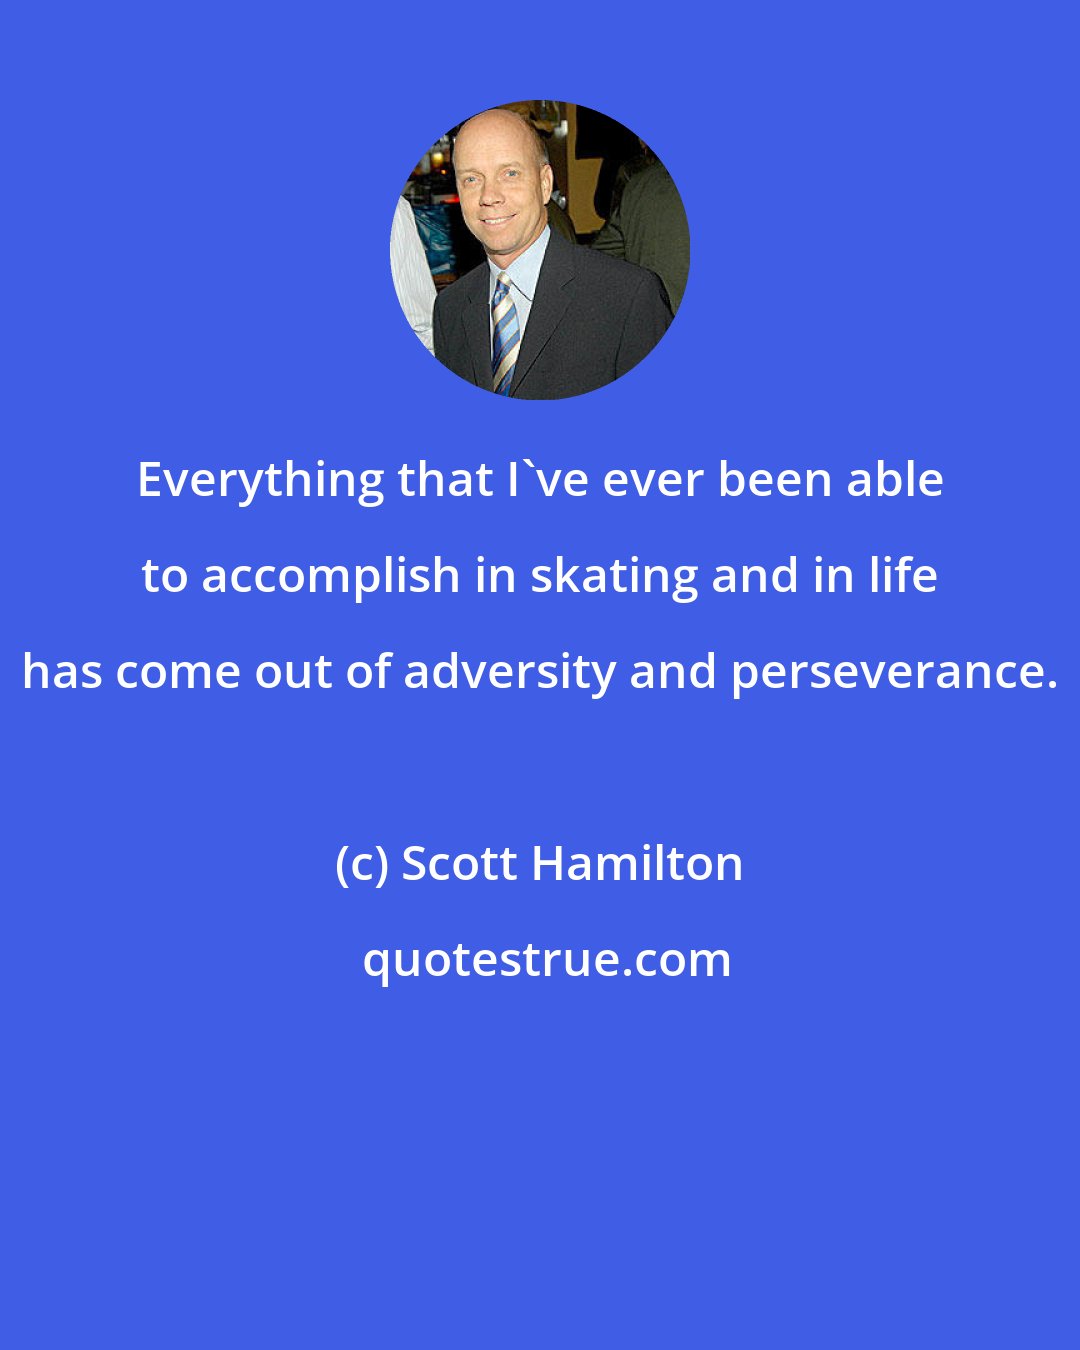 Scott Hamilton: Everything that I've ever been able to accomplish in skating and in life has come out of adversity and perseverance.